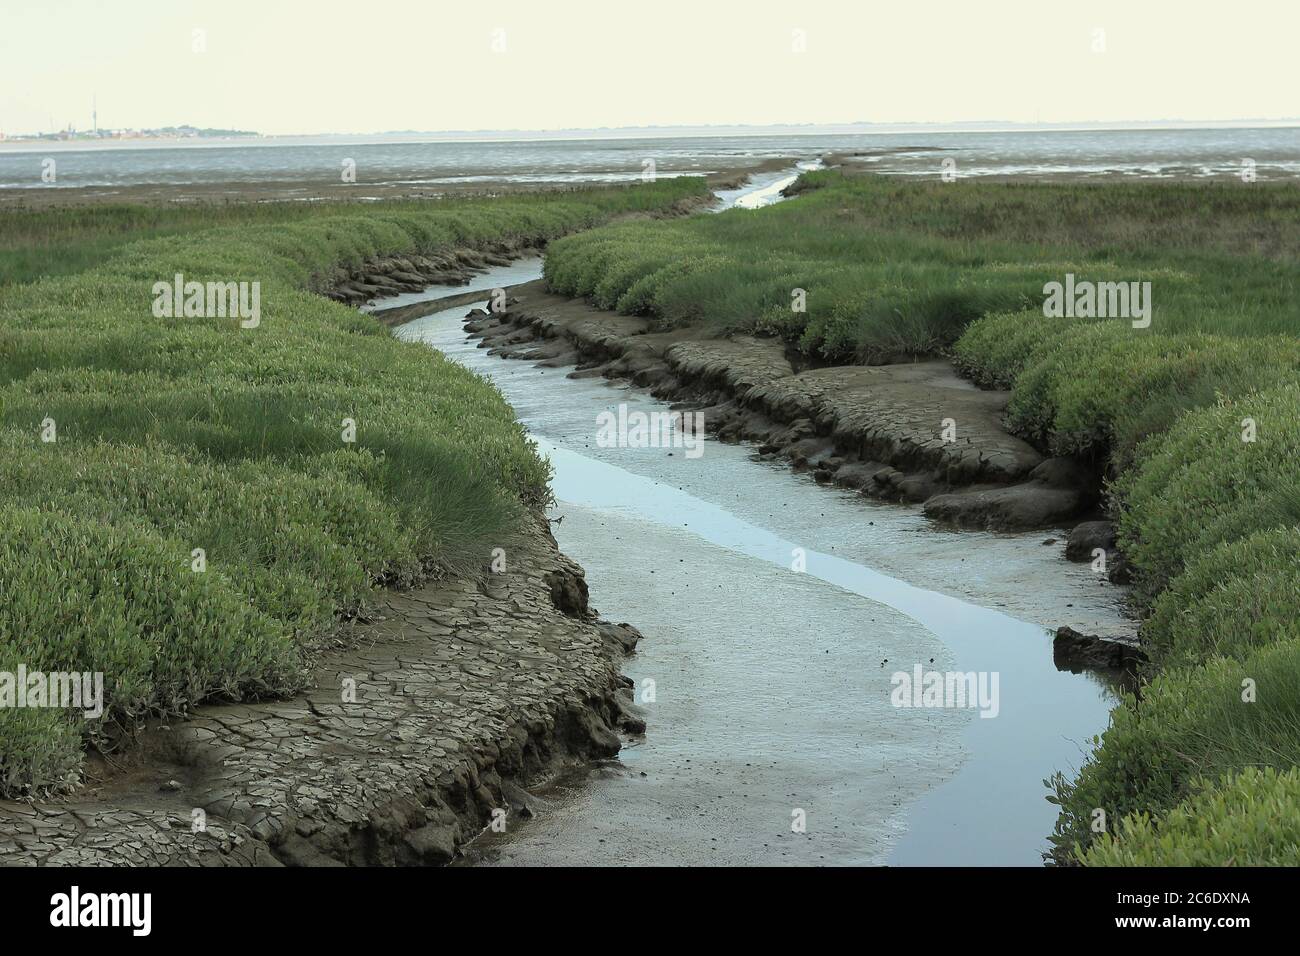 Tidal creek during low tide in a saltmarsh near Cäciliengroden, Jadebusen, Germany. Stock Photo